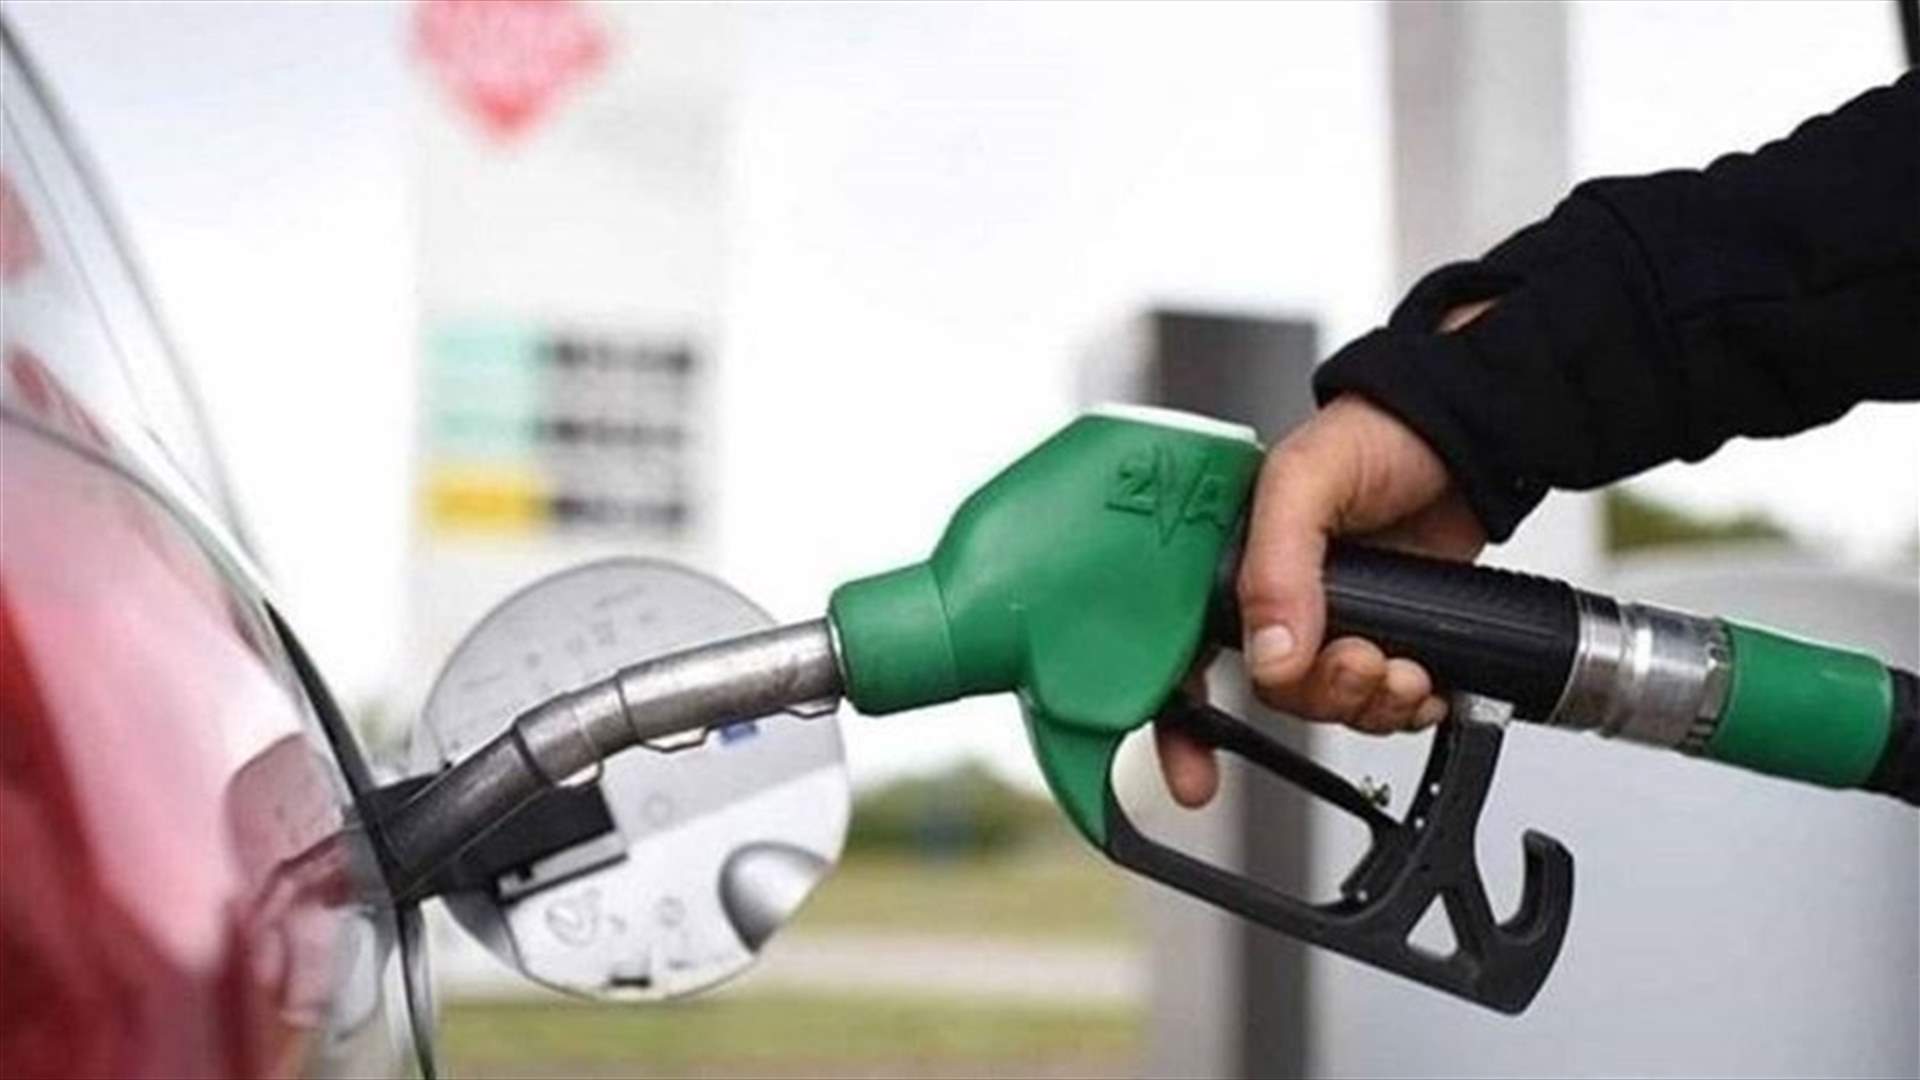 Fuel prices reach new high